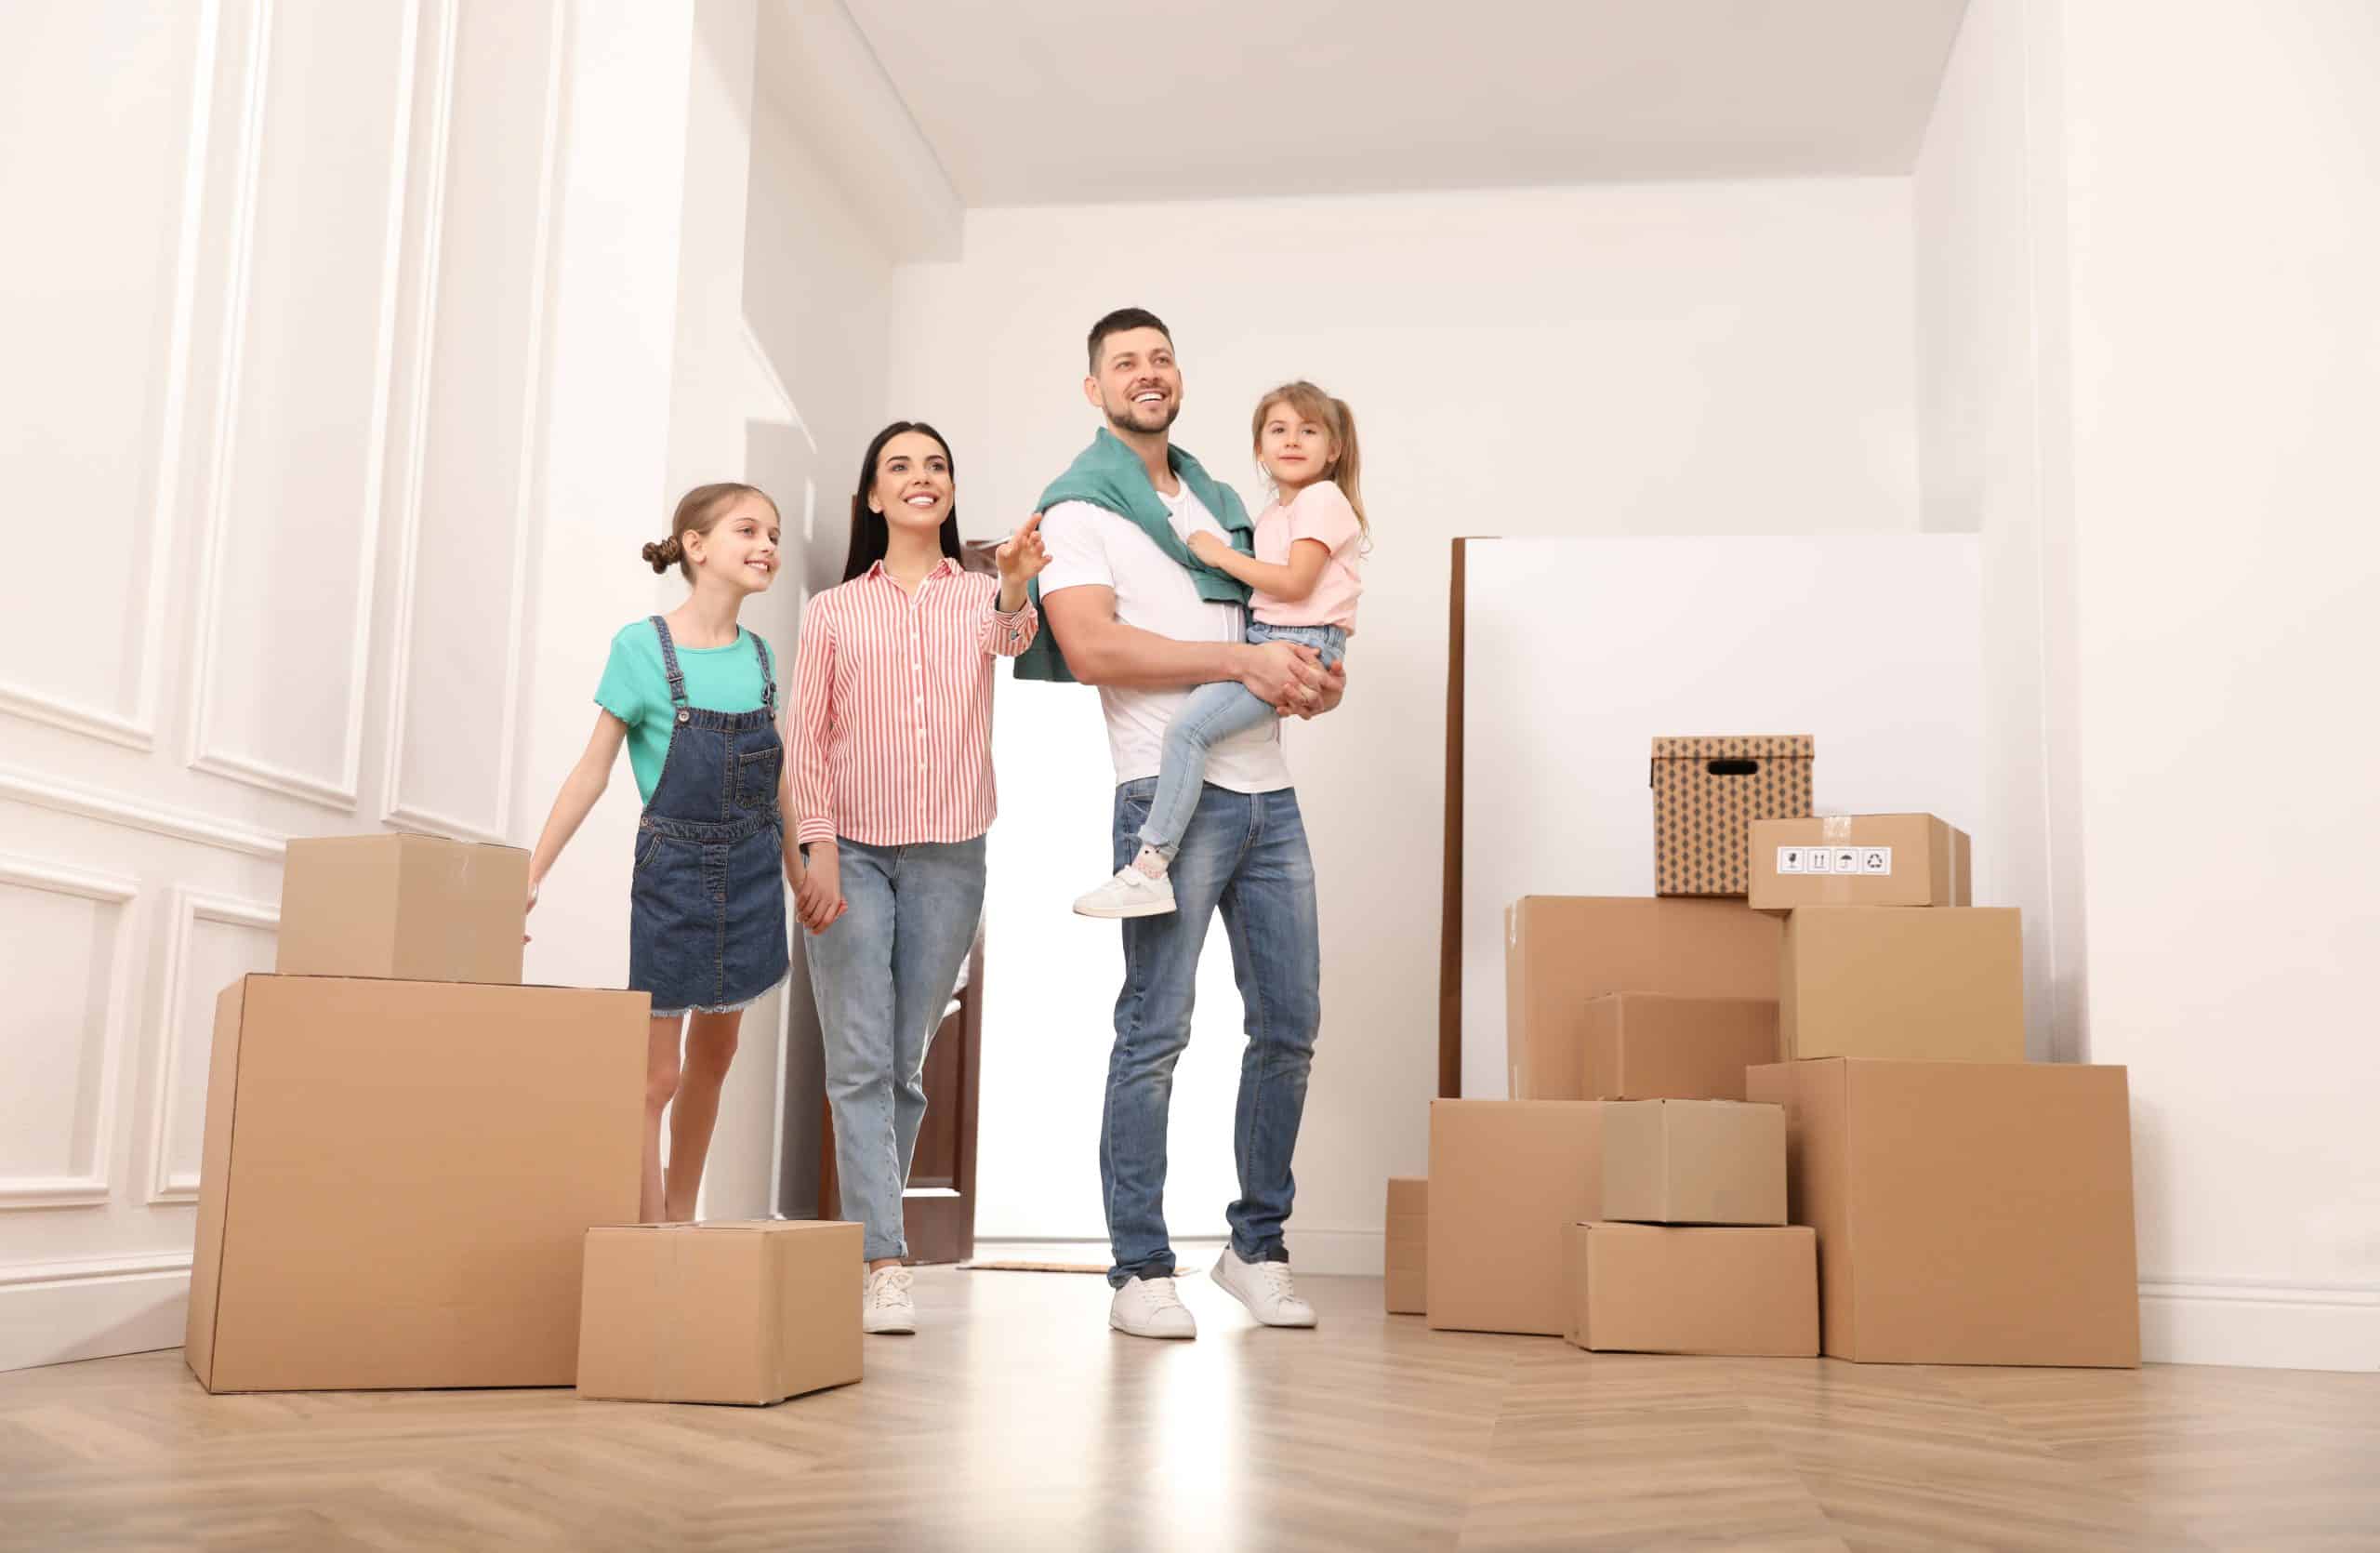 Photo shows a family of 4 standing in their new home surrounded by moving boxes